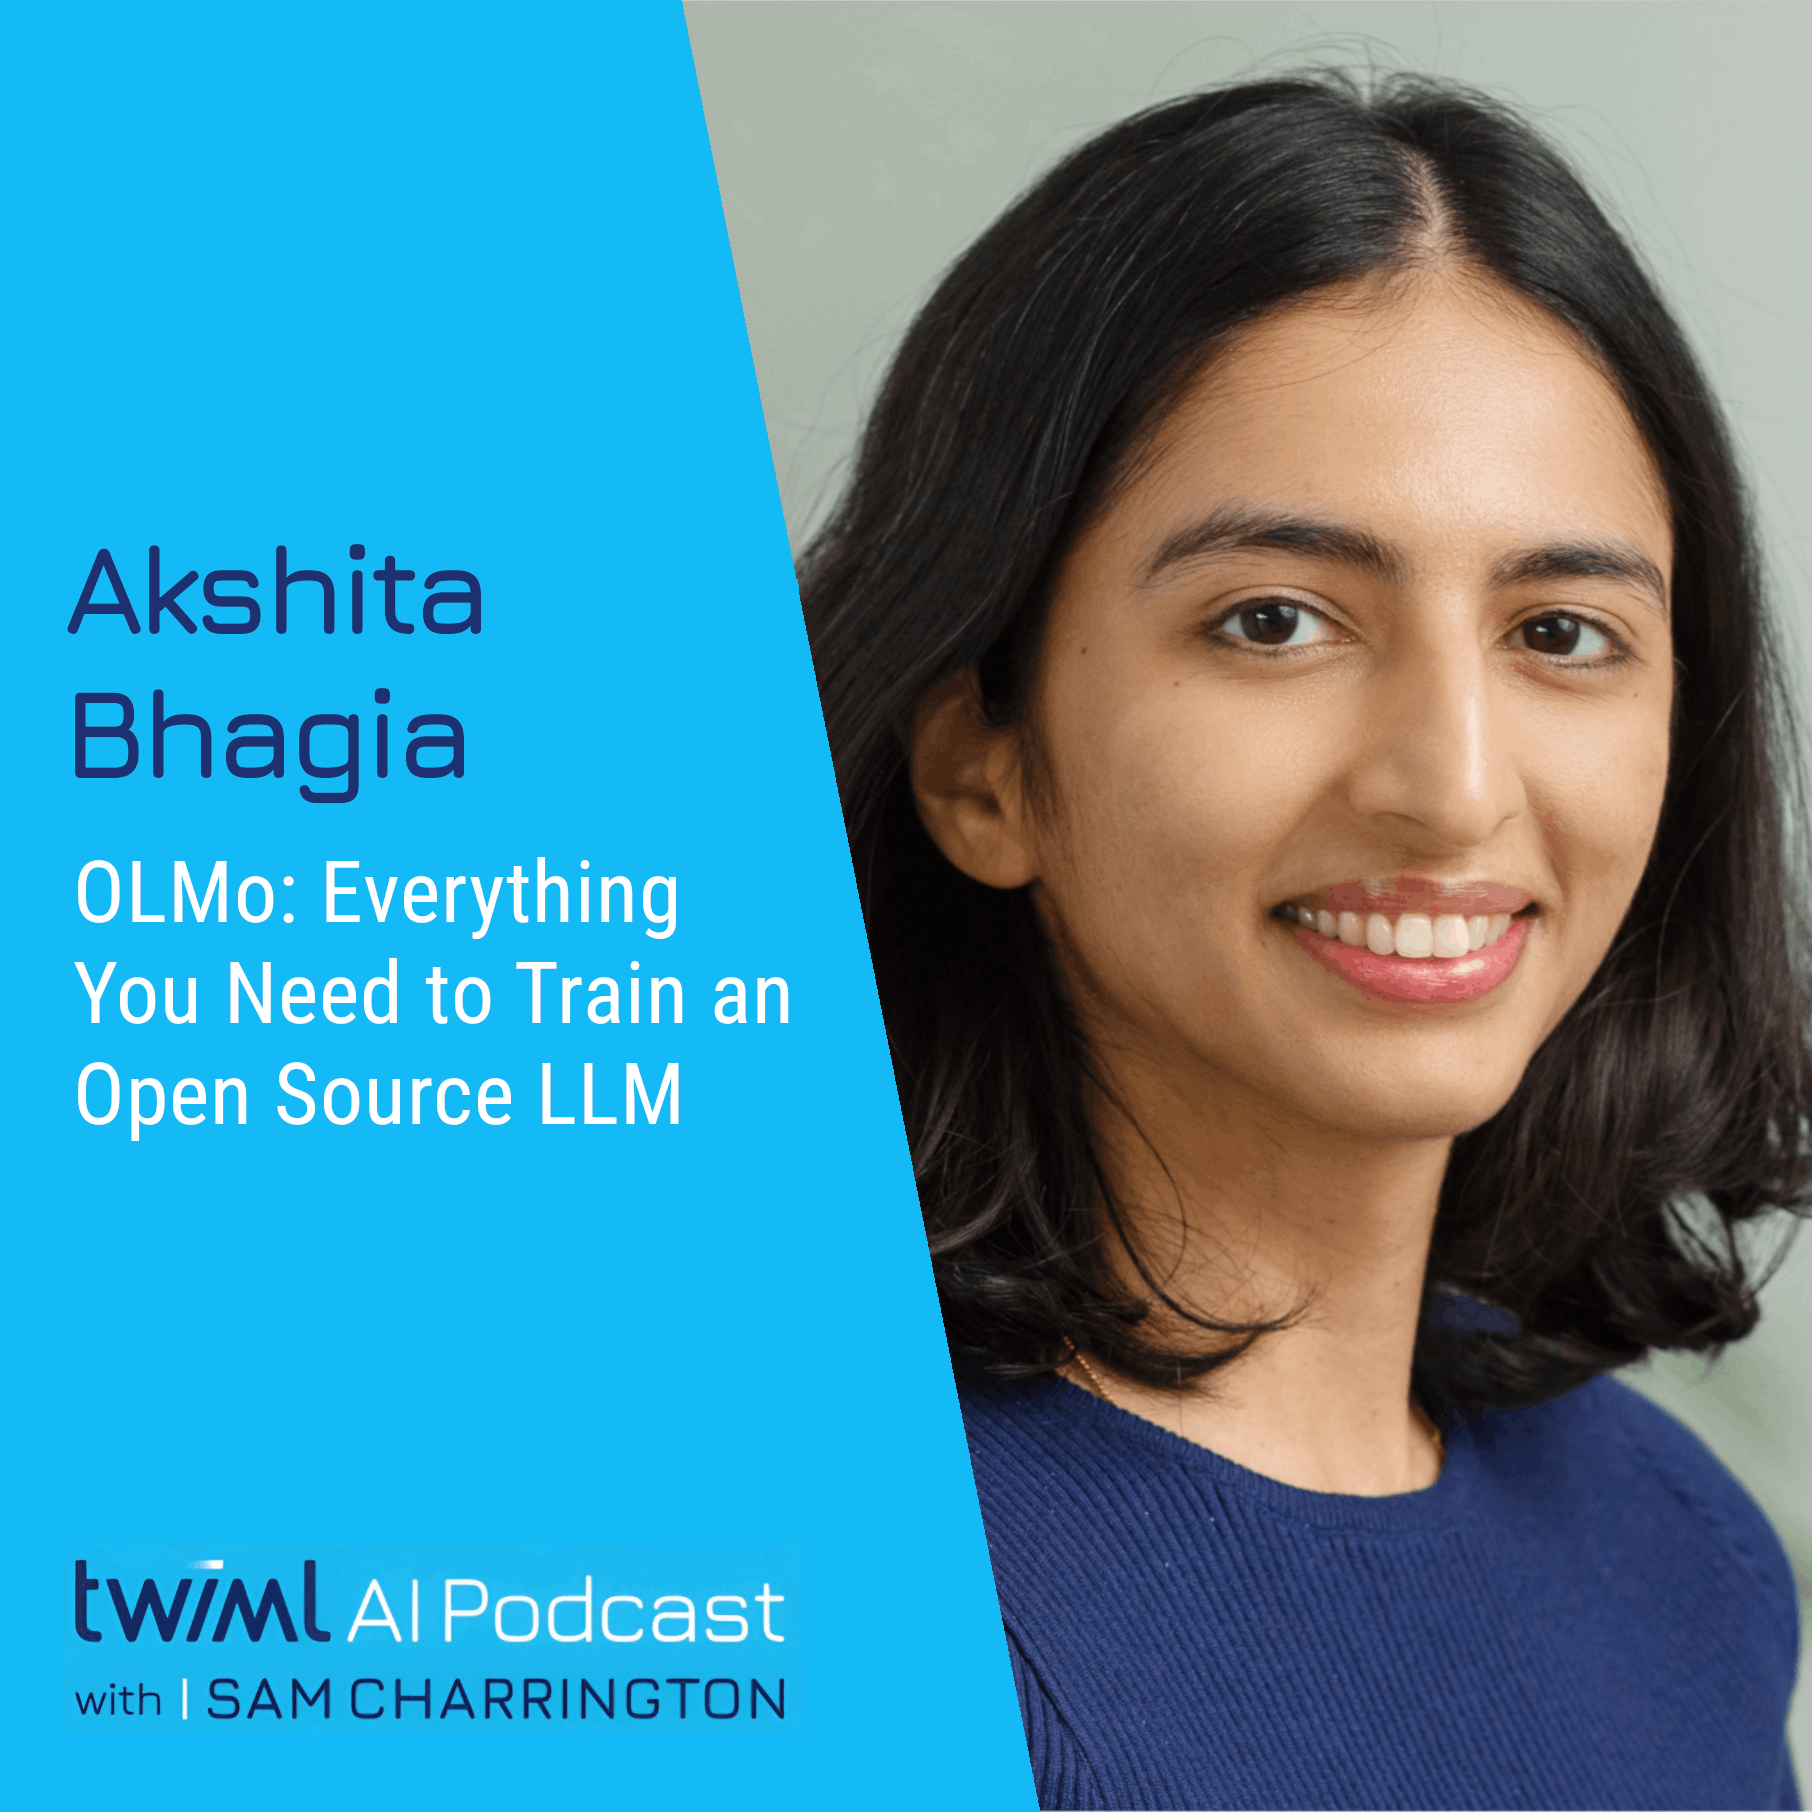 OLMo: Everything You Need to Train an Open Source LLM with Akshita Bhagia - #674